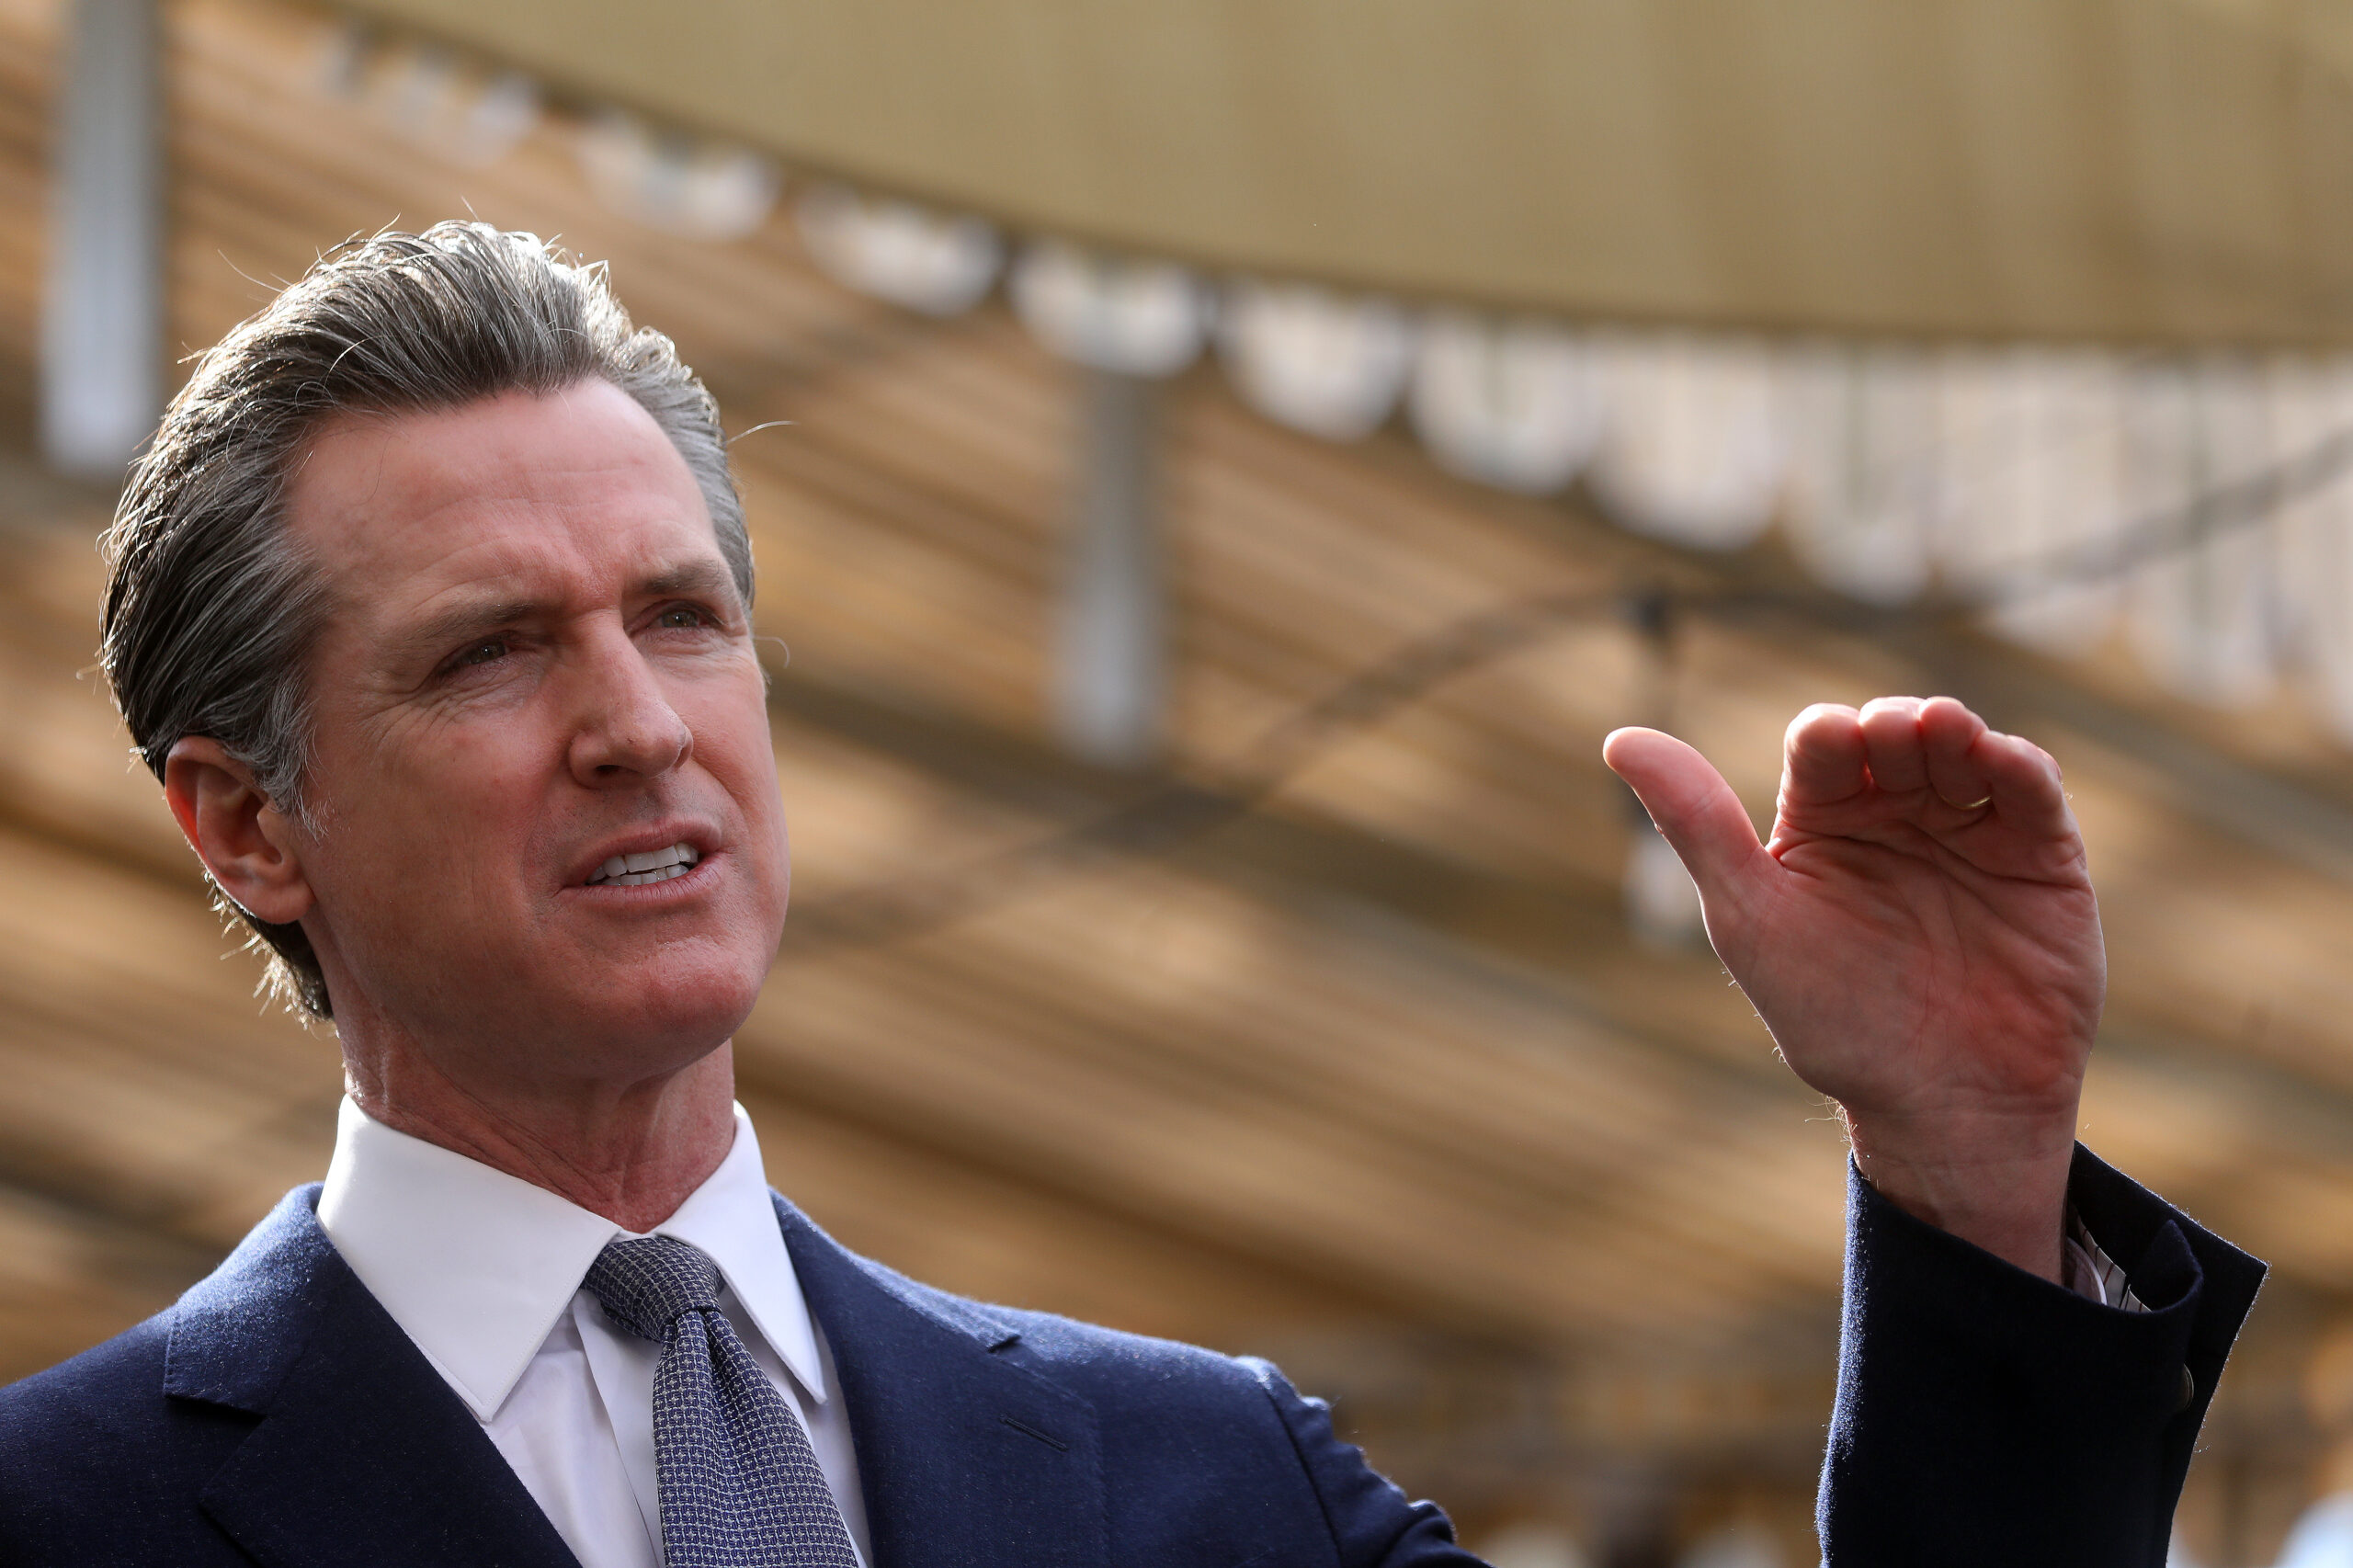 Newsom Proposes Budget Cuts as State Faces $22B Deficit 